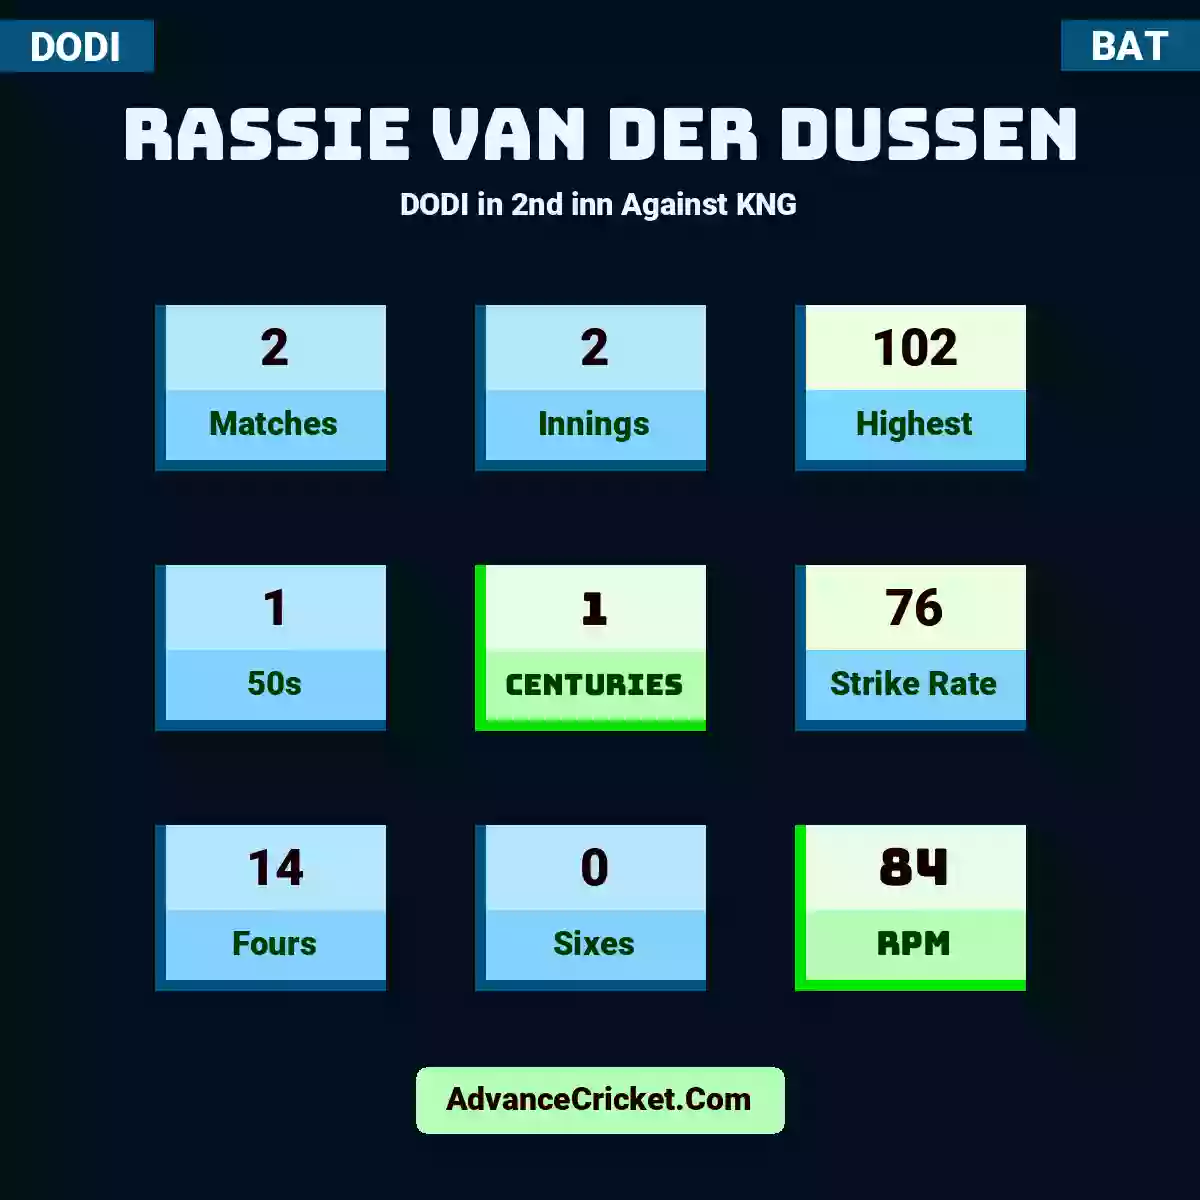 Rassie van der Dussen DODI  in 2nd inn Against KNG, Rassie van der Dussen played 2 matches, scored 102 runs as highest, 1 half-centuries, and 1 centuries, with a strike rate of 76. R.Dussen hit 14 fours and 0 sixes, with an RPM of 84.